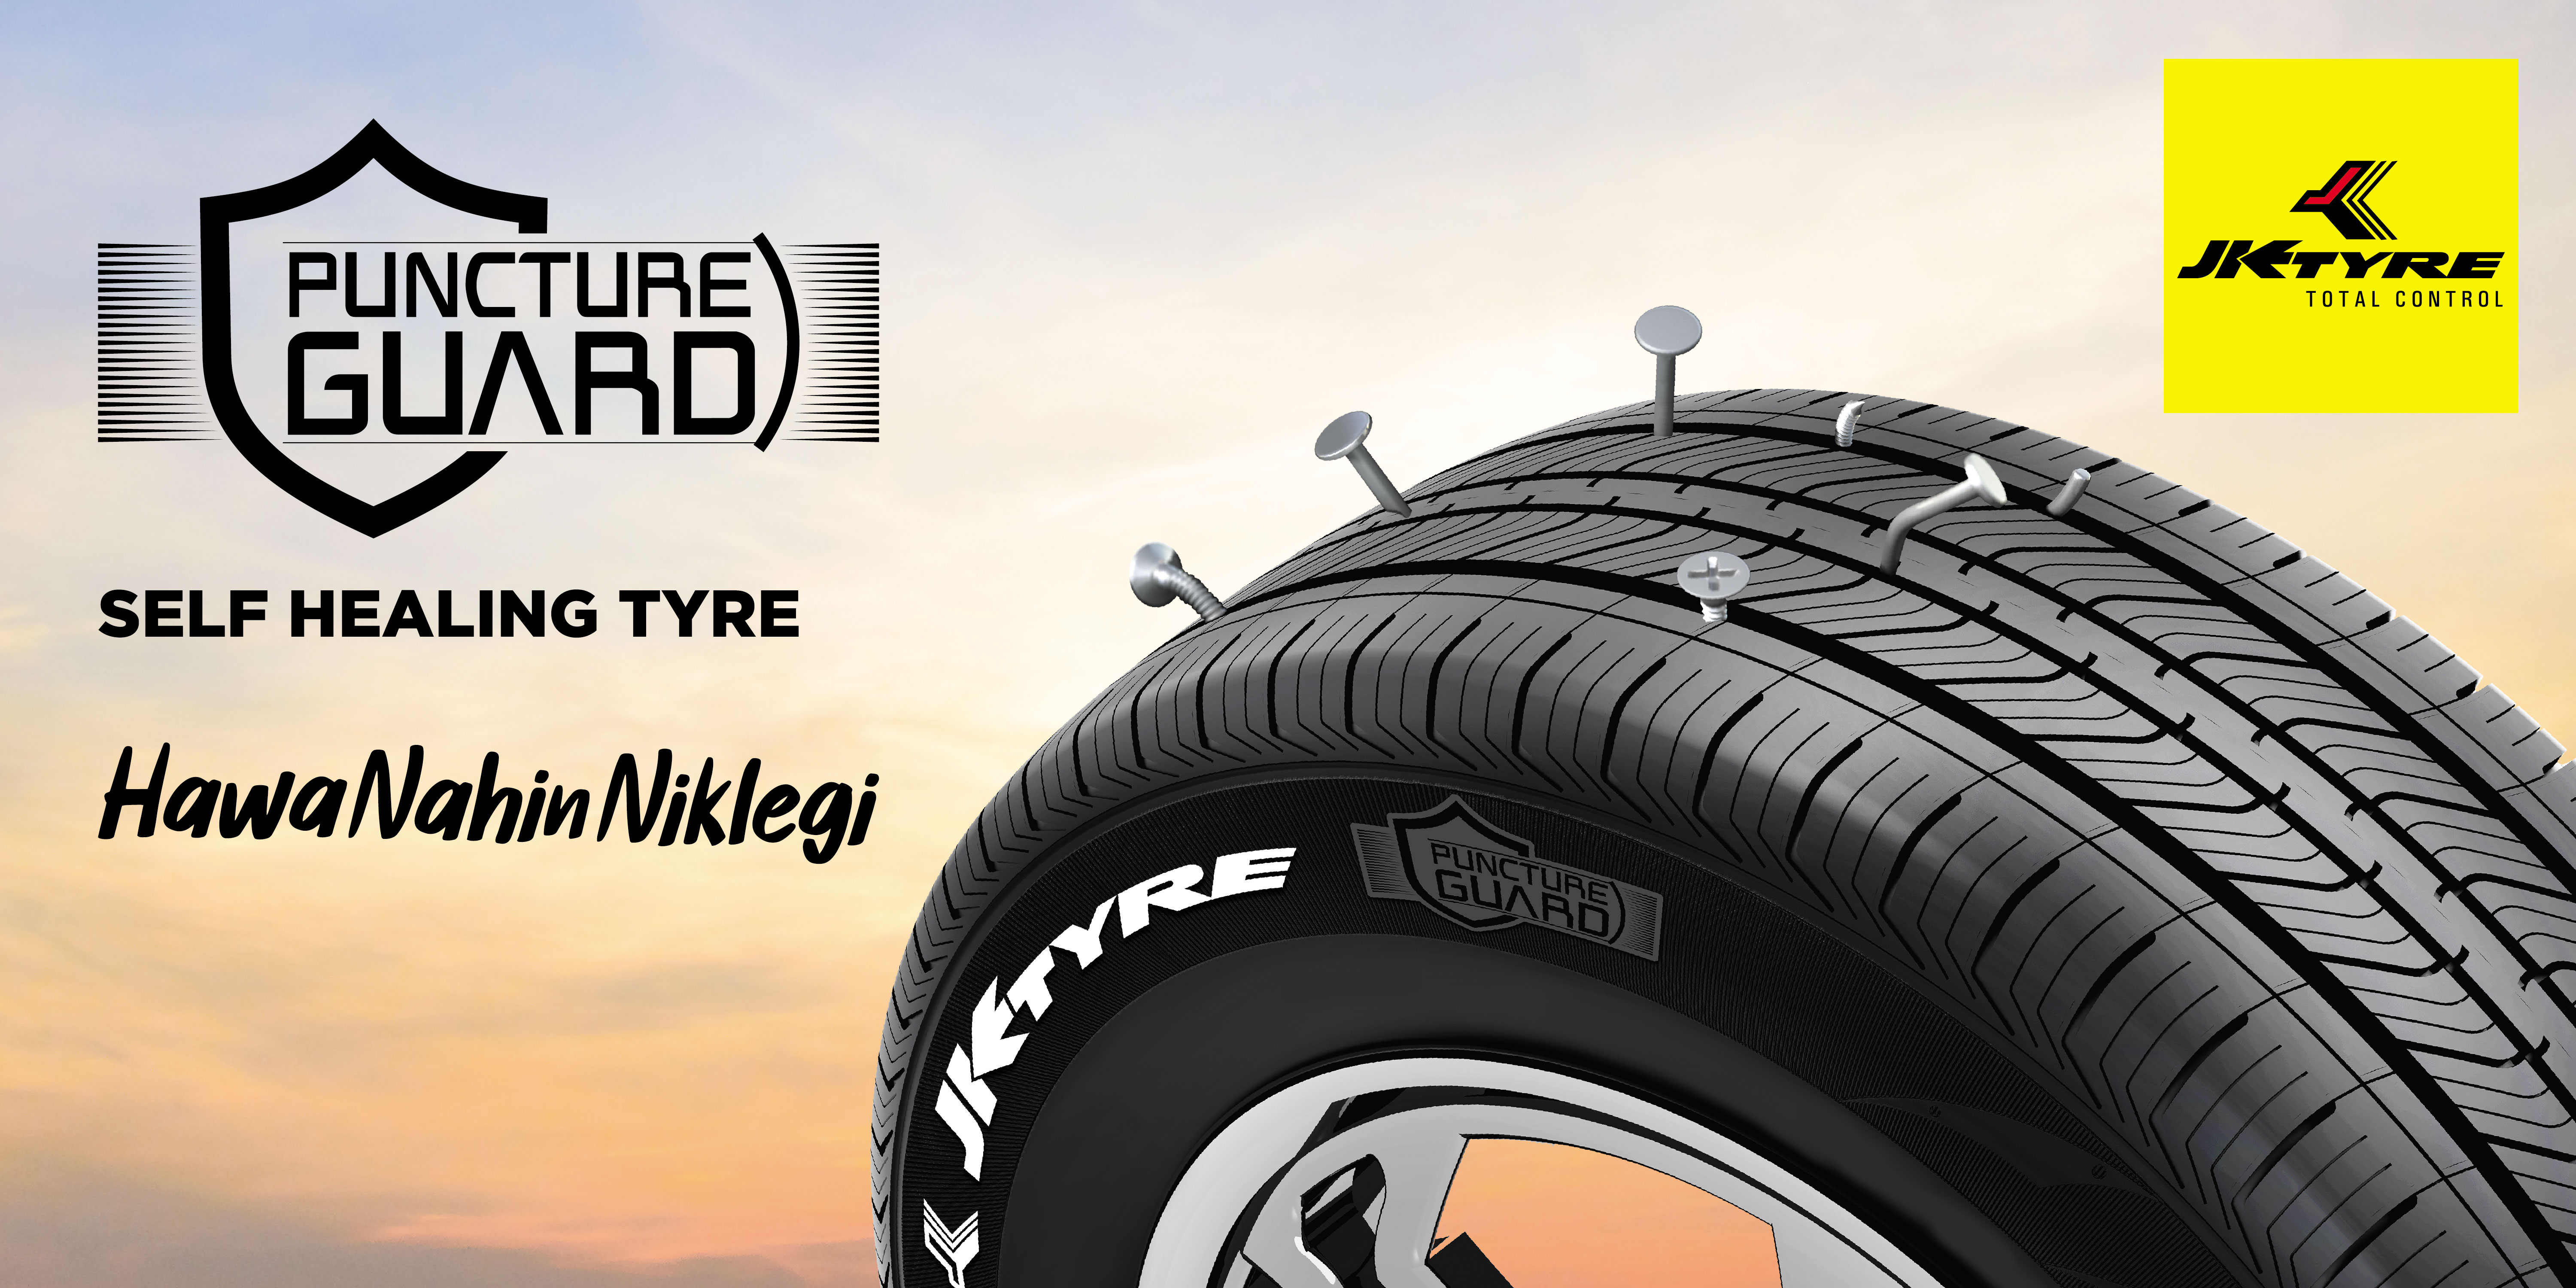 JK Tyre Sets Another Industry Benchmark, Introduces ‘Puncture Guard Tyre’